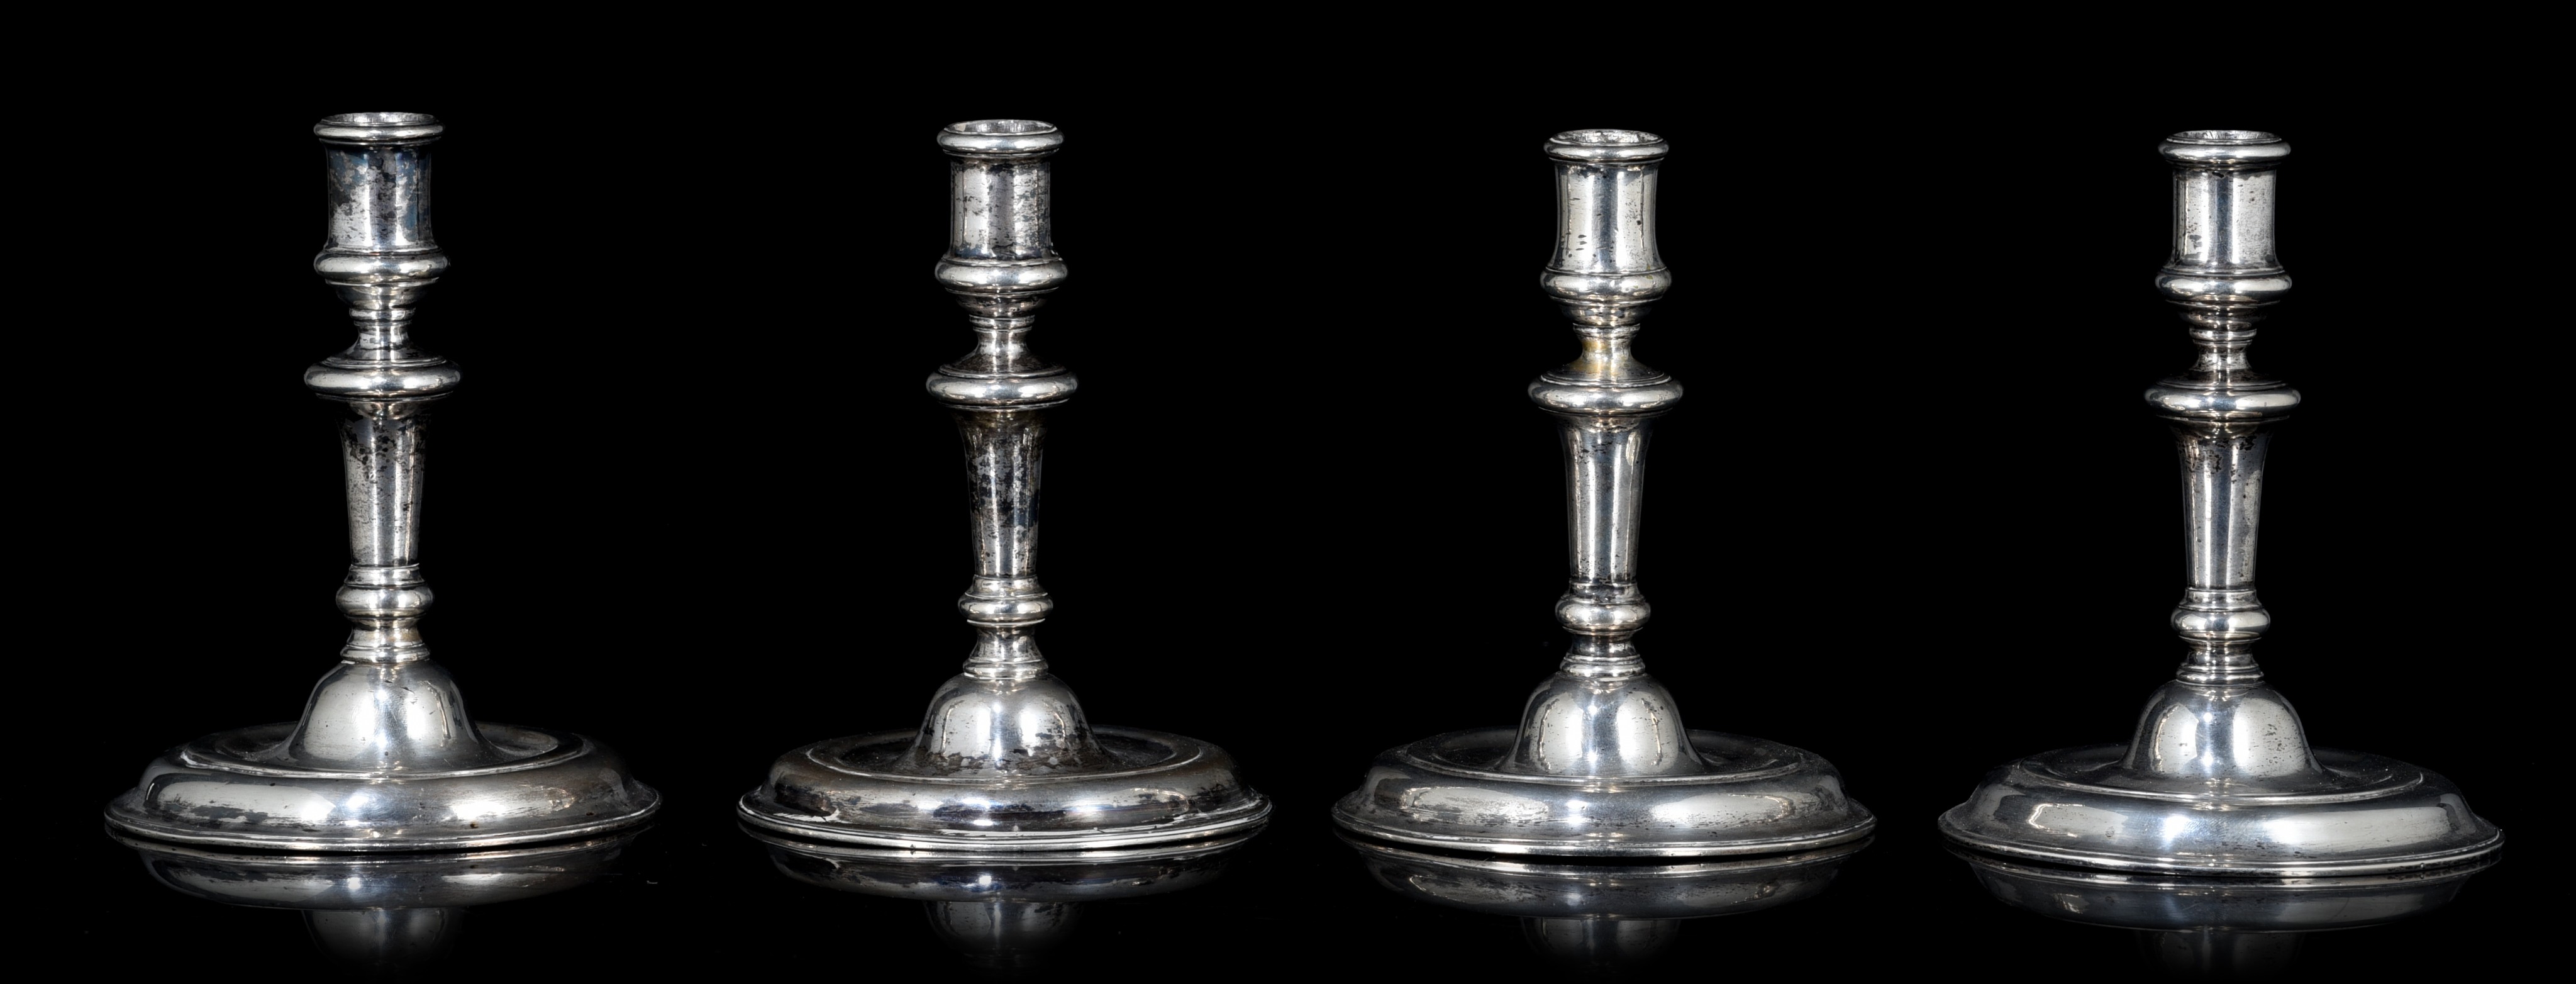 A set of four German silver candlesticks, hallmarked Dresden, mid 18thC, H 15,5 cm - total weight: 1